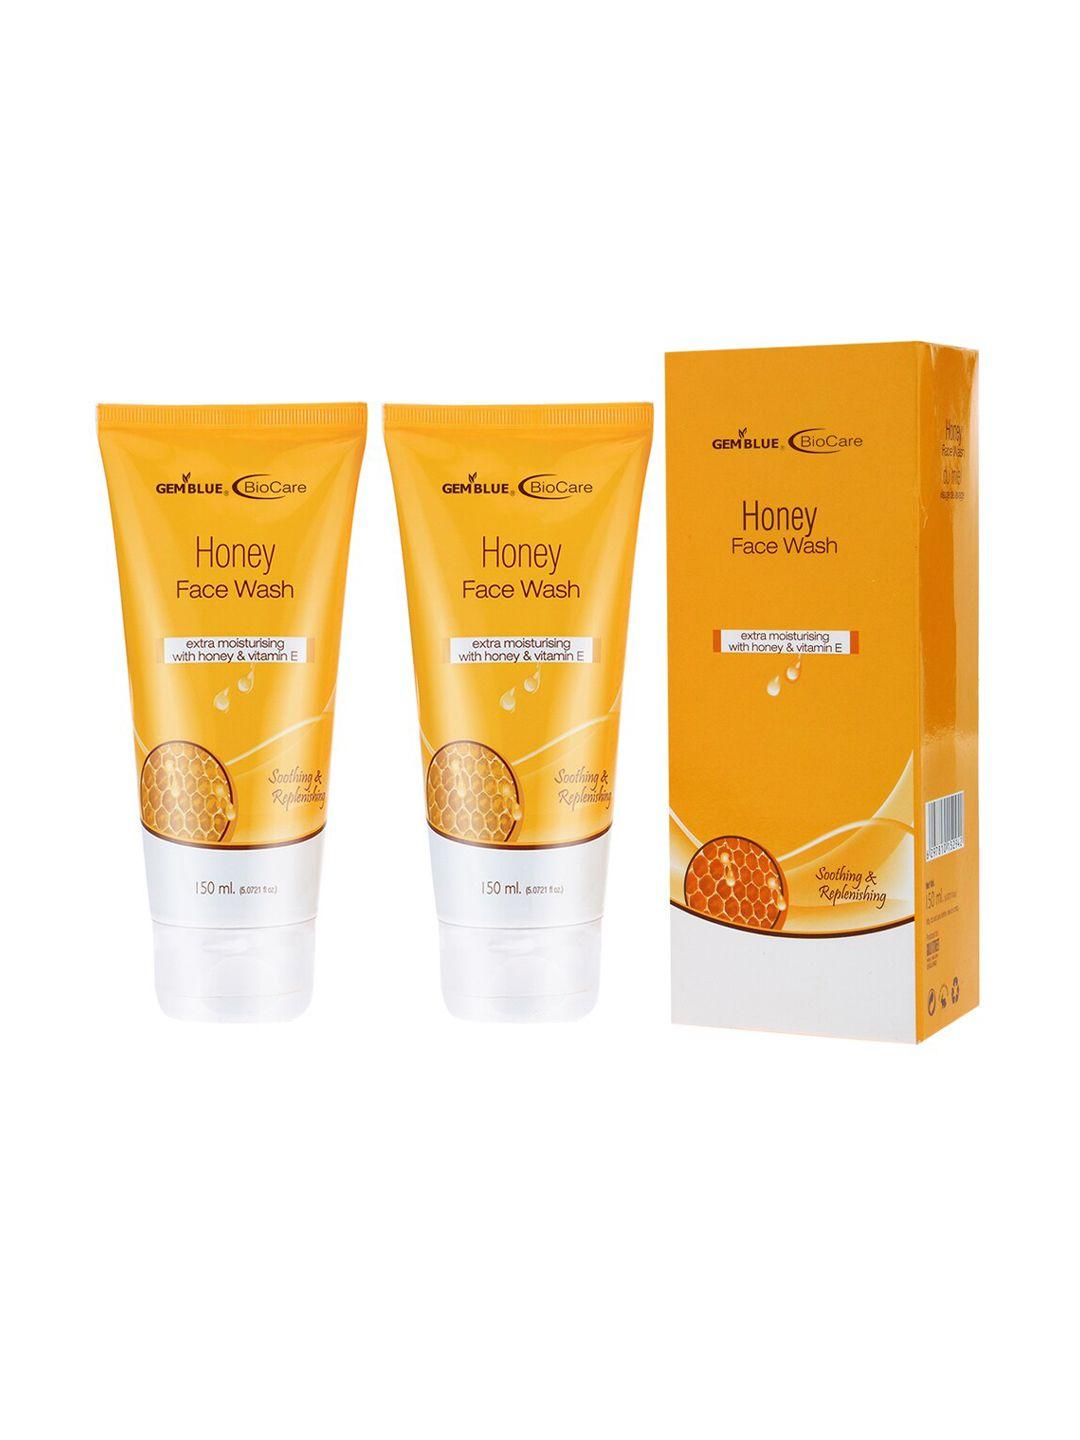 gemblue biocare pack of 2 honey face wash 300ml